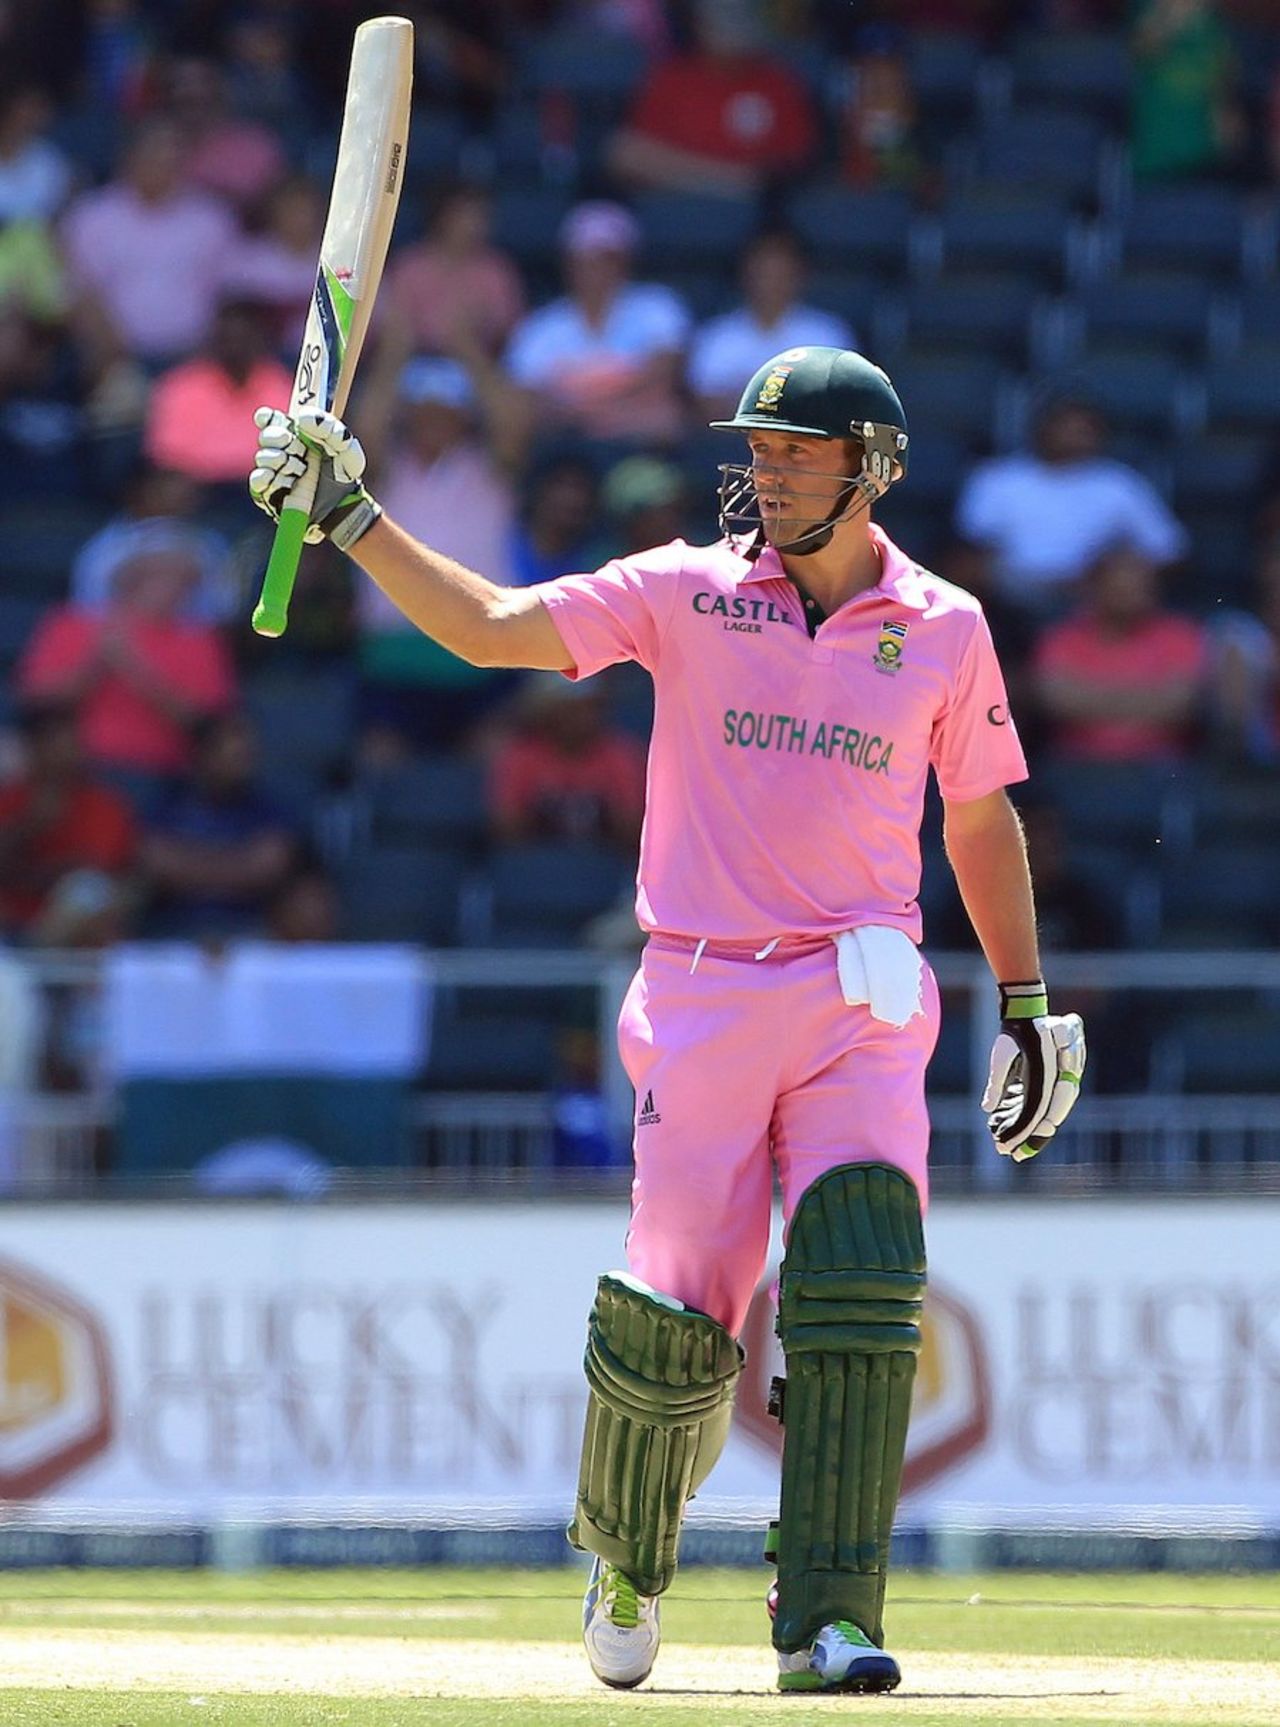 AB de Villiers acknowledges his fifty, South Africa v Pakistan, 3rd ODI, Johannesburg, March 17, 2013